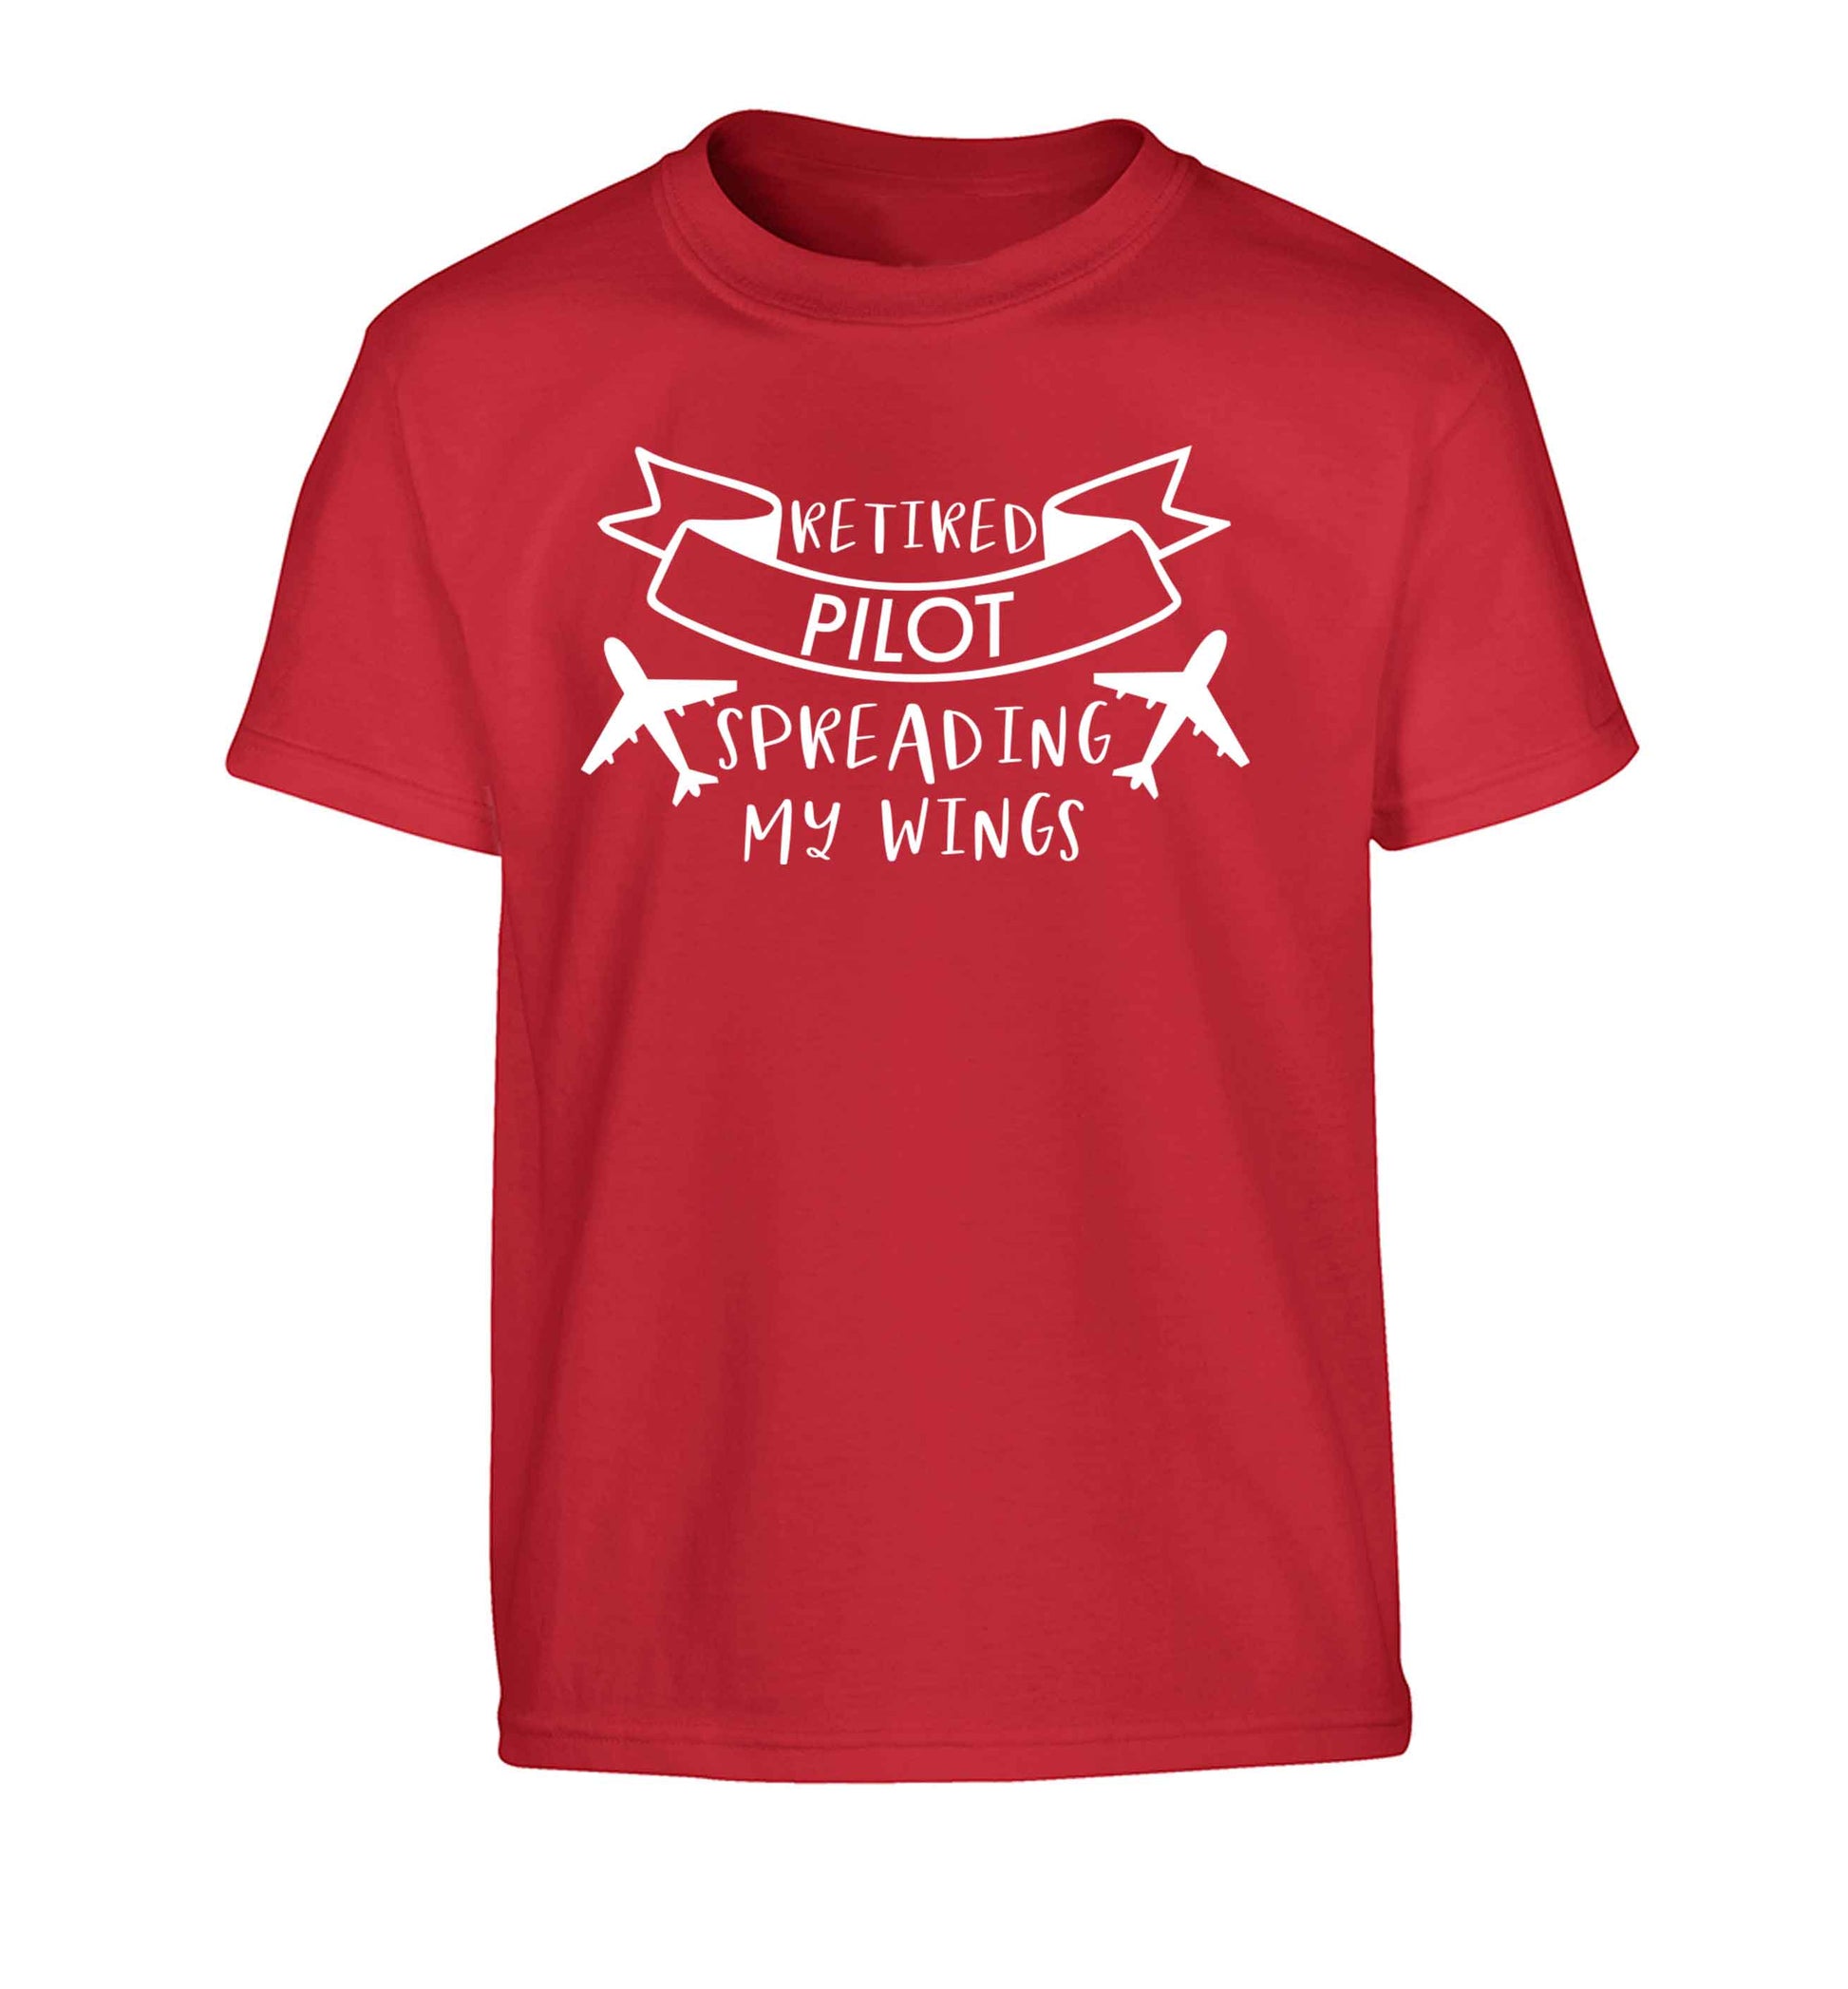 Retired pilot spreading my wings Children's red Tshirt 12-13 Years